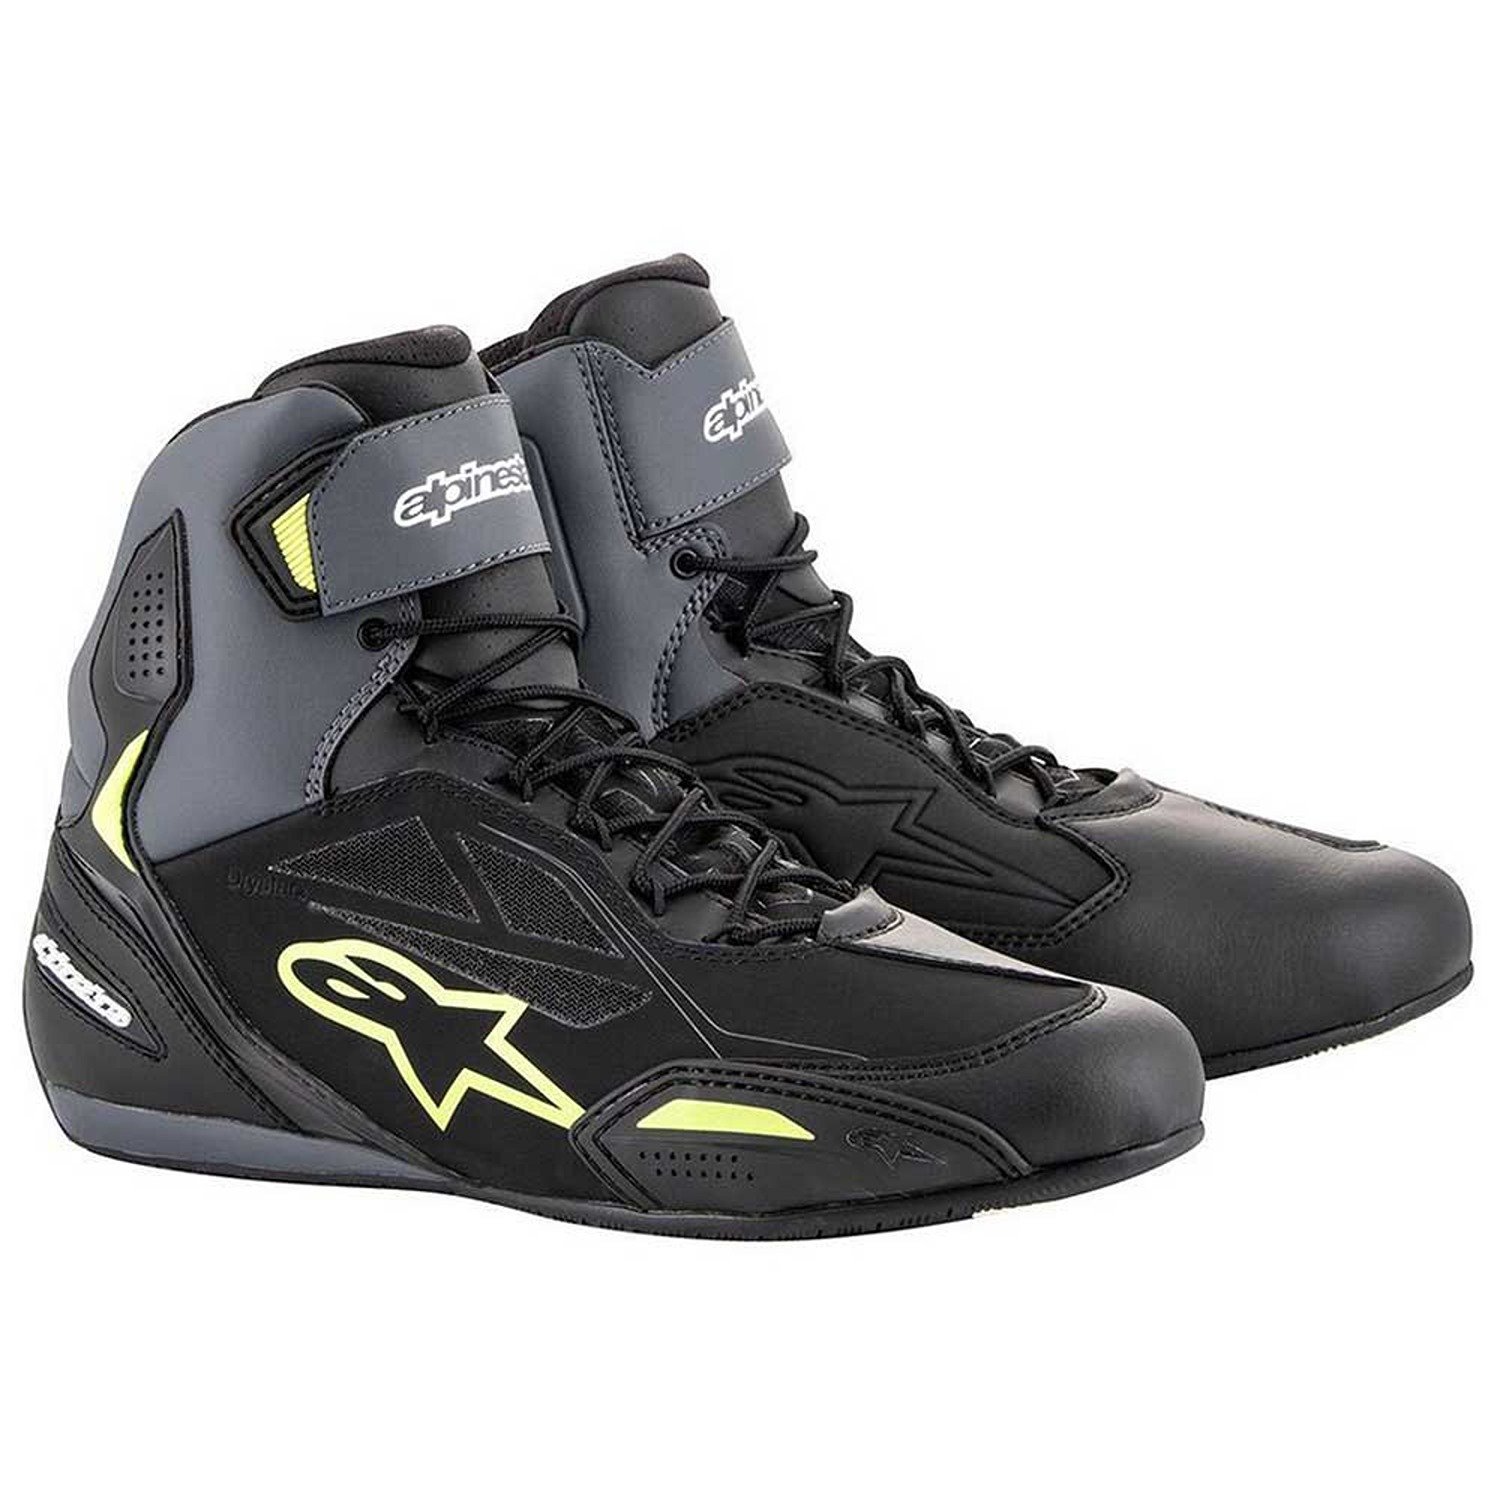 Image of Alpinestars Faster-3 Shoes Black Yellow Fluo Size US 135 ID 8059347331171